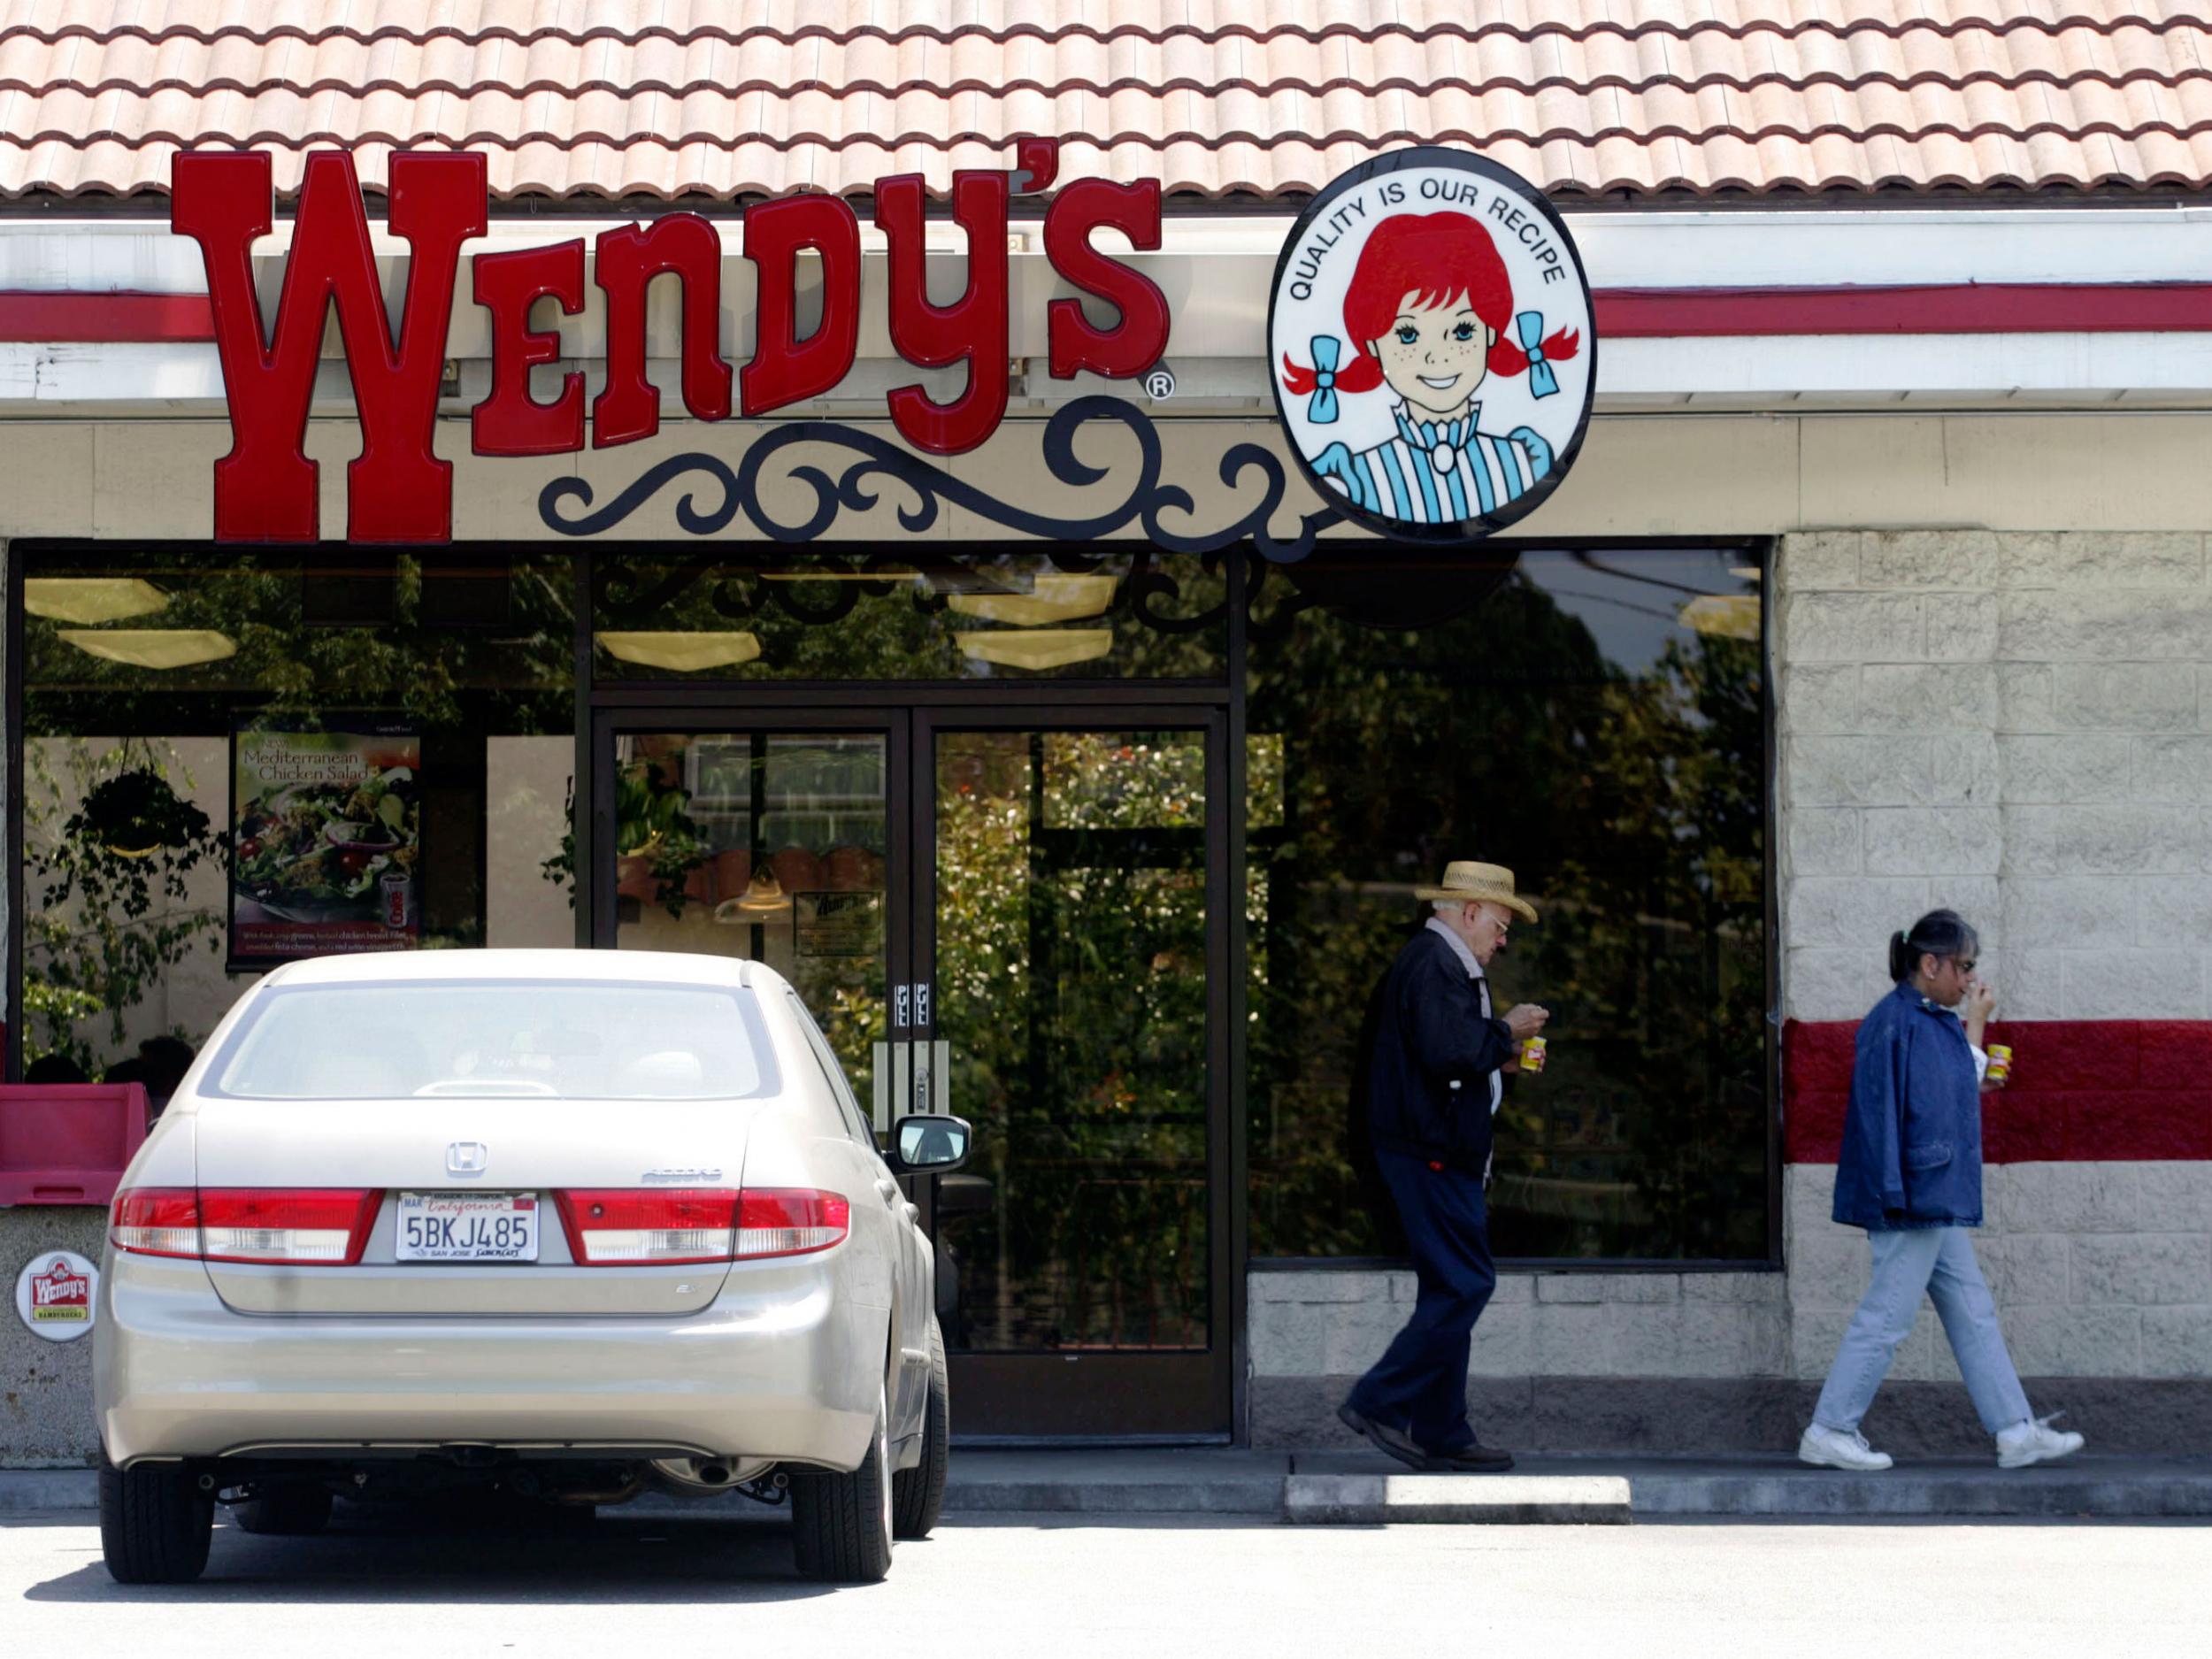 The majority of Wendy's outlets are operated as franchises